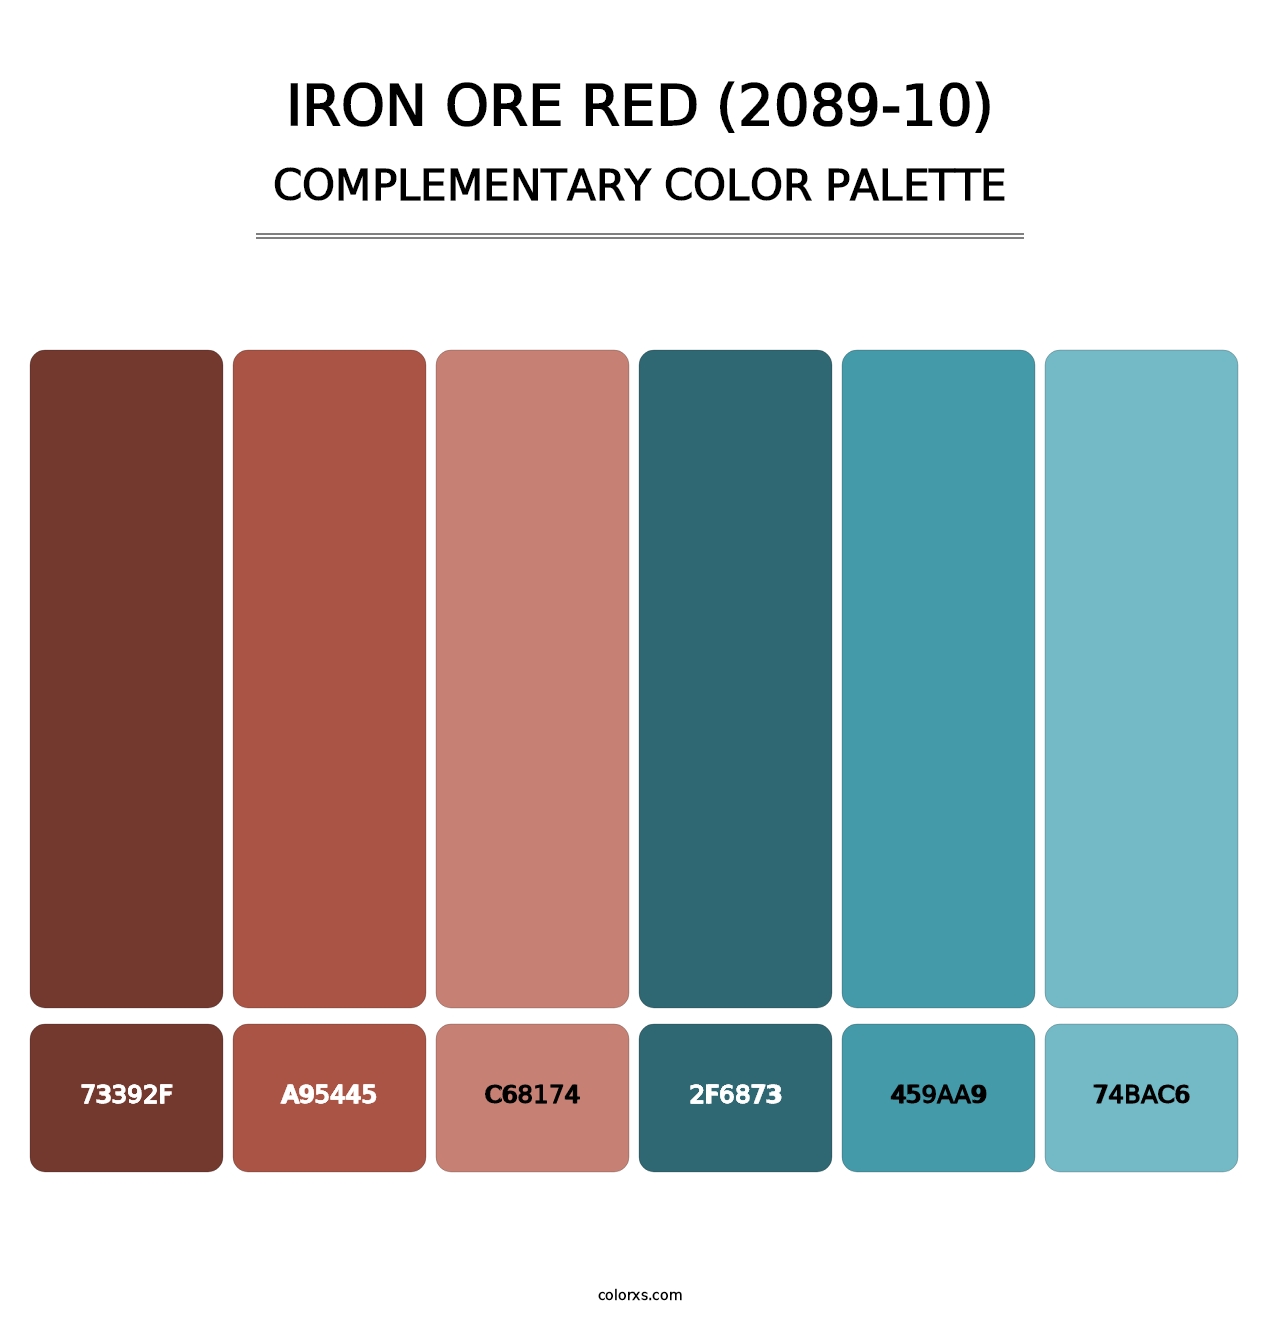 Iron Ore Red (2089-10) - Complementary Color Palette